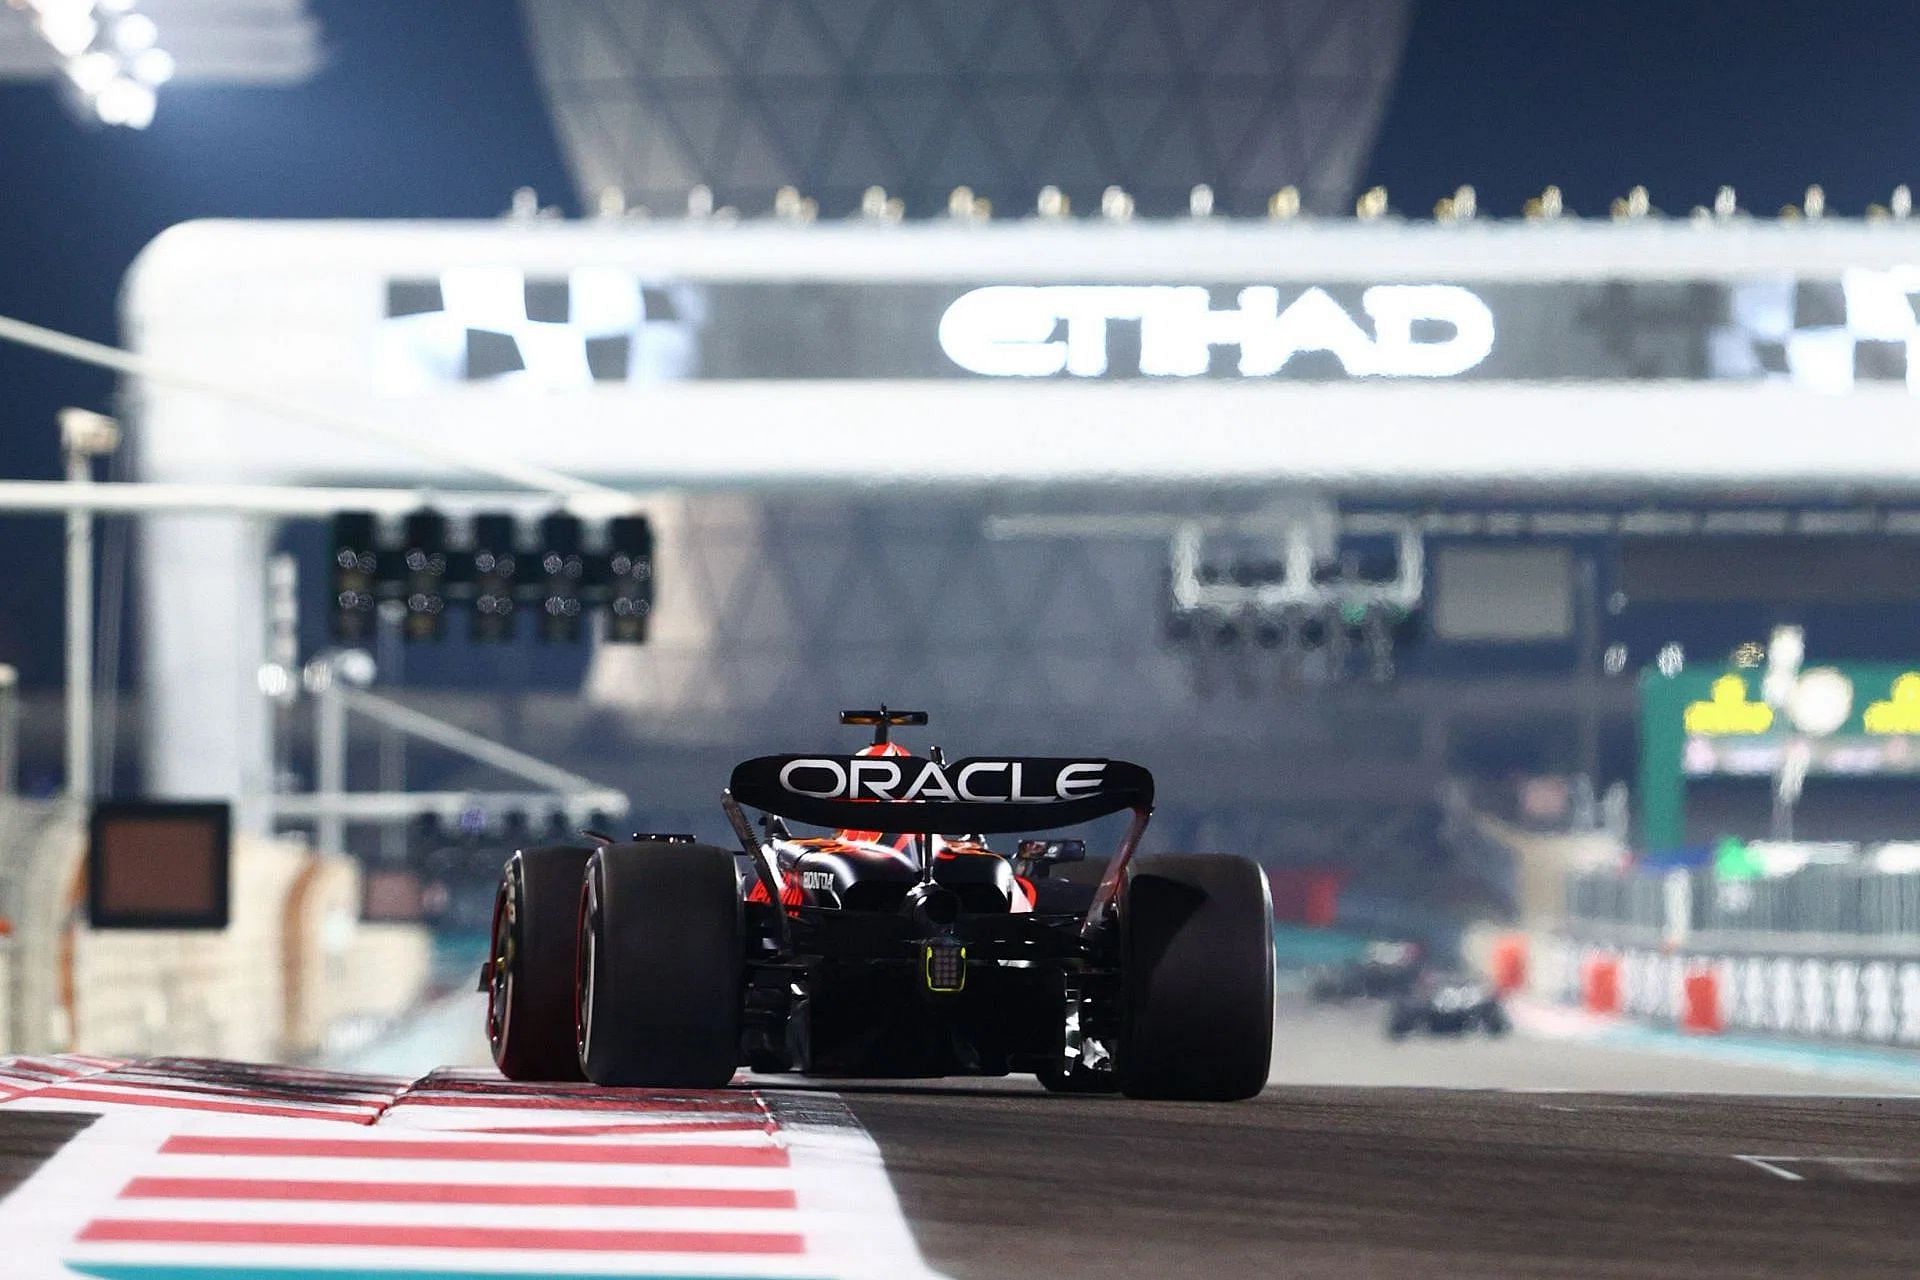 Max Verstappen (1) on track during the 2023 F1 Abu Dhabi Grand Prix. (Photo by Clive Rose/Getty Images)